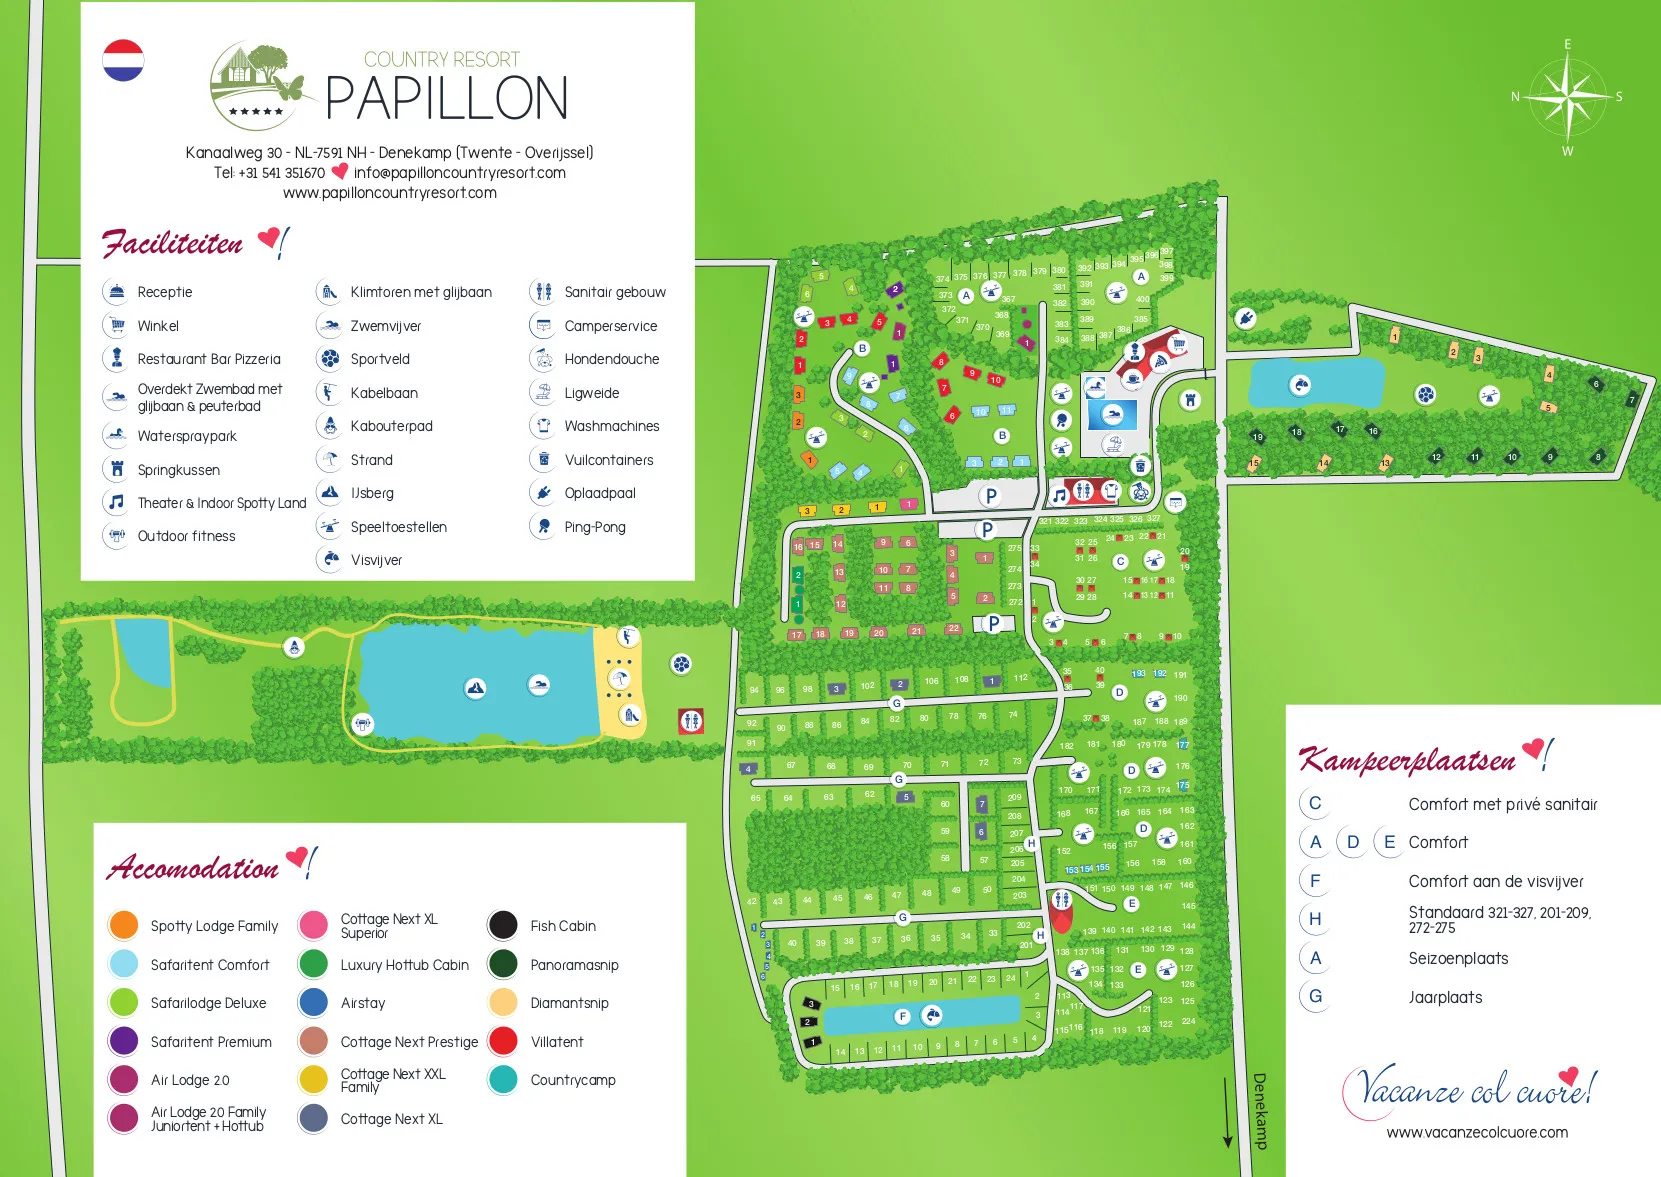 PAPILLON Country Resort